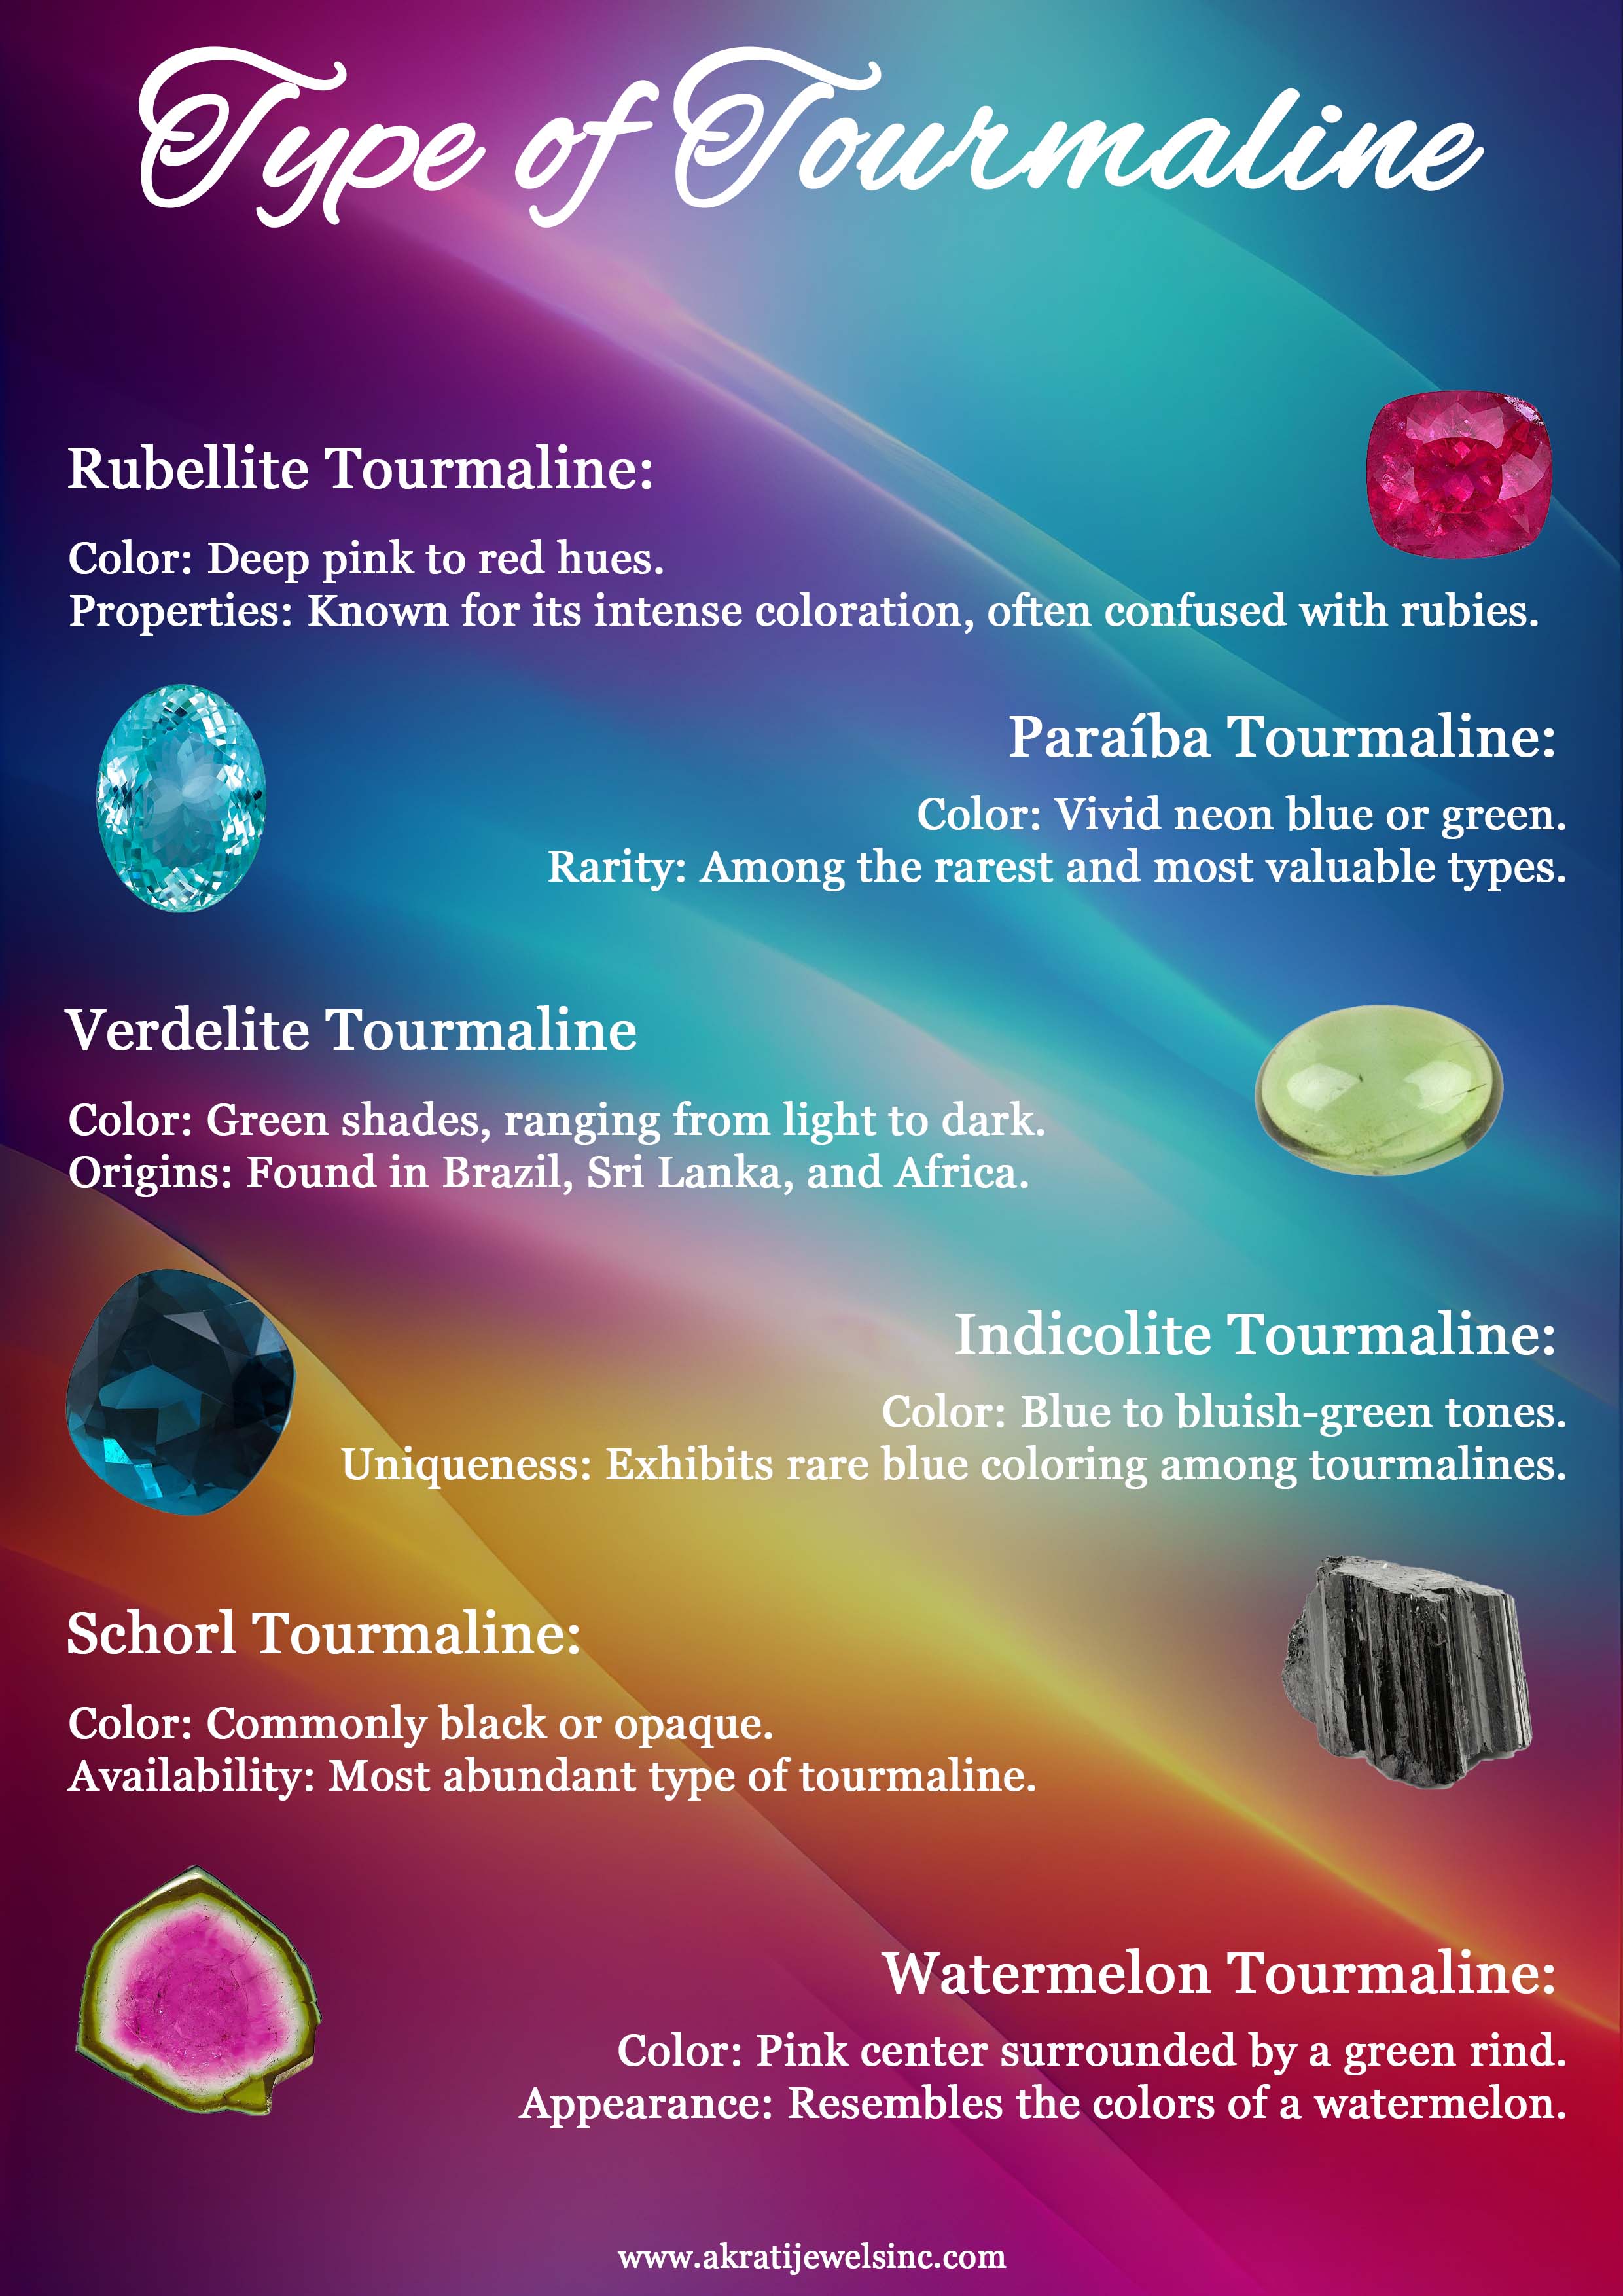 : : ta IY
Rubellite Tourmaline: TR
Color: Deep pink to red hues.

Properties: Known for its intense coloration, o SL RB TIE

Paraiba Tourmaline:

Color: Vivid neon blue or green.
Rarity: Among the ra and most valuable types.

         
 
  
    
  
 
  
 
  

Verdelite Tourmalin

Color: Green shades, rar § 8 4
Origins: Found in Bi: Bs —

maline:

een tones.
BR
AY

Schorl Tourn

Color: Commonly black or ¢
Availability: Most abundant ty;

9
aque

ve of tourmaline.

  

Watermelon Tourmaline:
a

Color: Pink center surrounded by a green rind.
Appearance: Resembles the colors of a watermelon.

 

www.akratijewelsinc.com